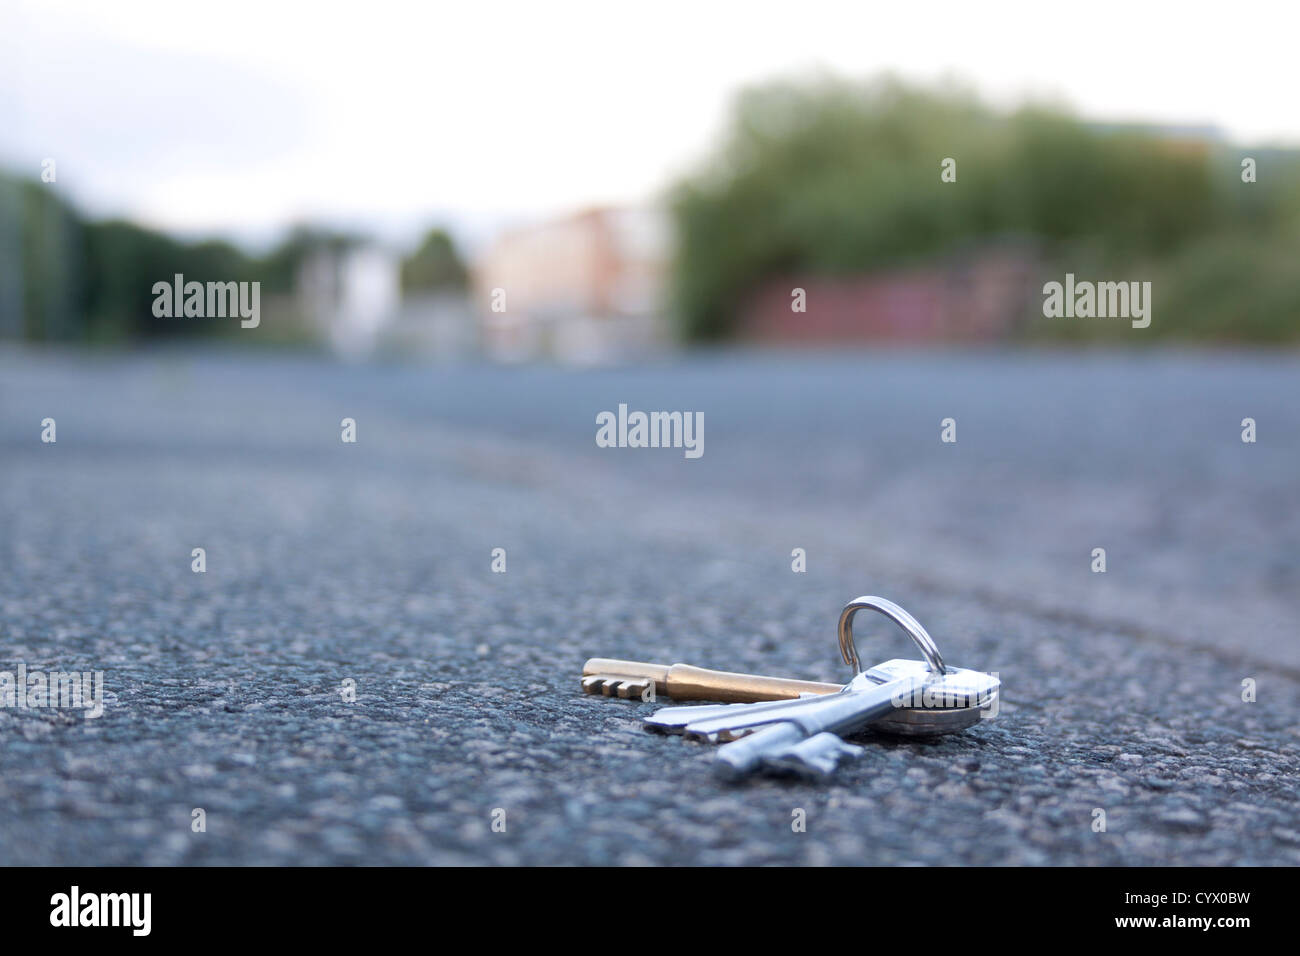 Keys on a pavement near some buildings Stock Photo